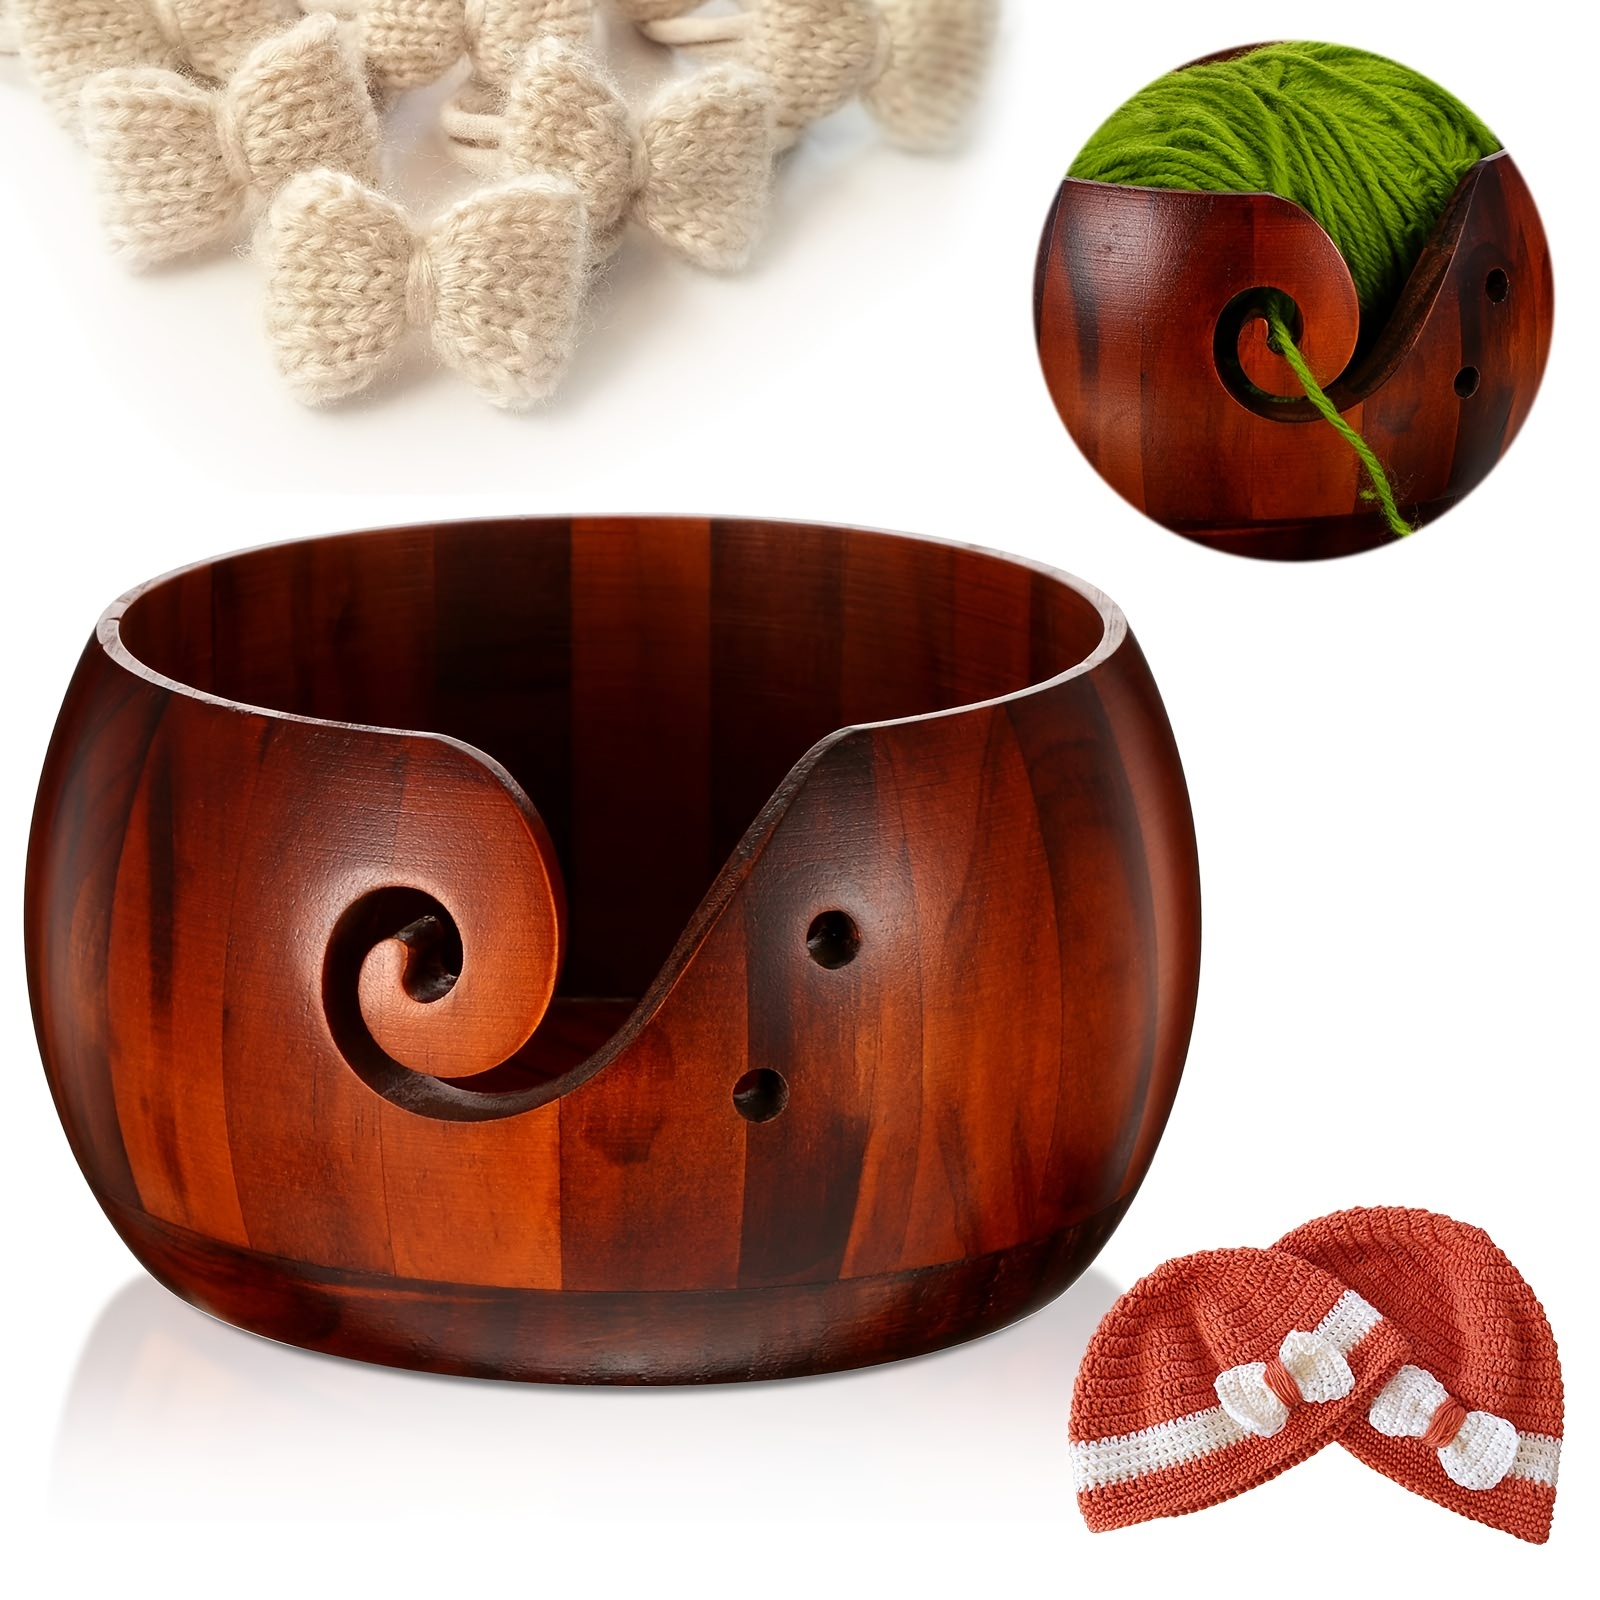 Yarn Knitting Bowl - Large Wooden Wool Bowl For Crochet And